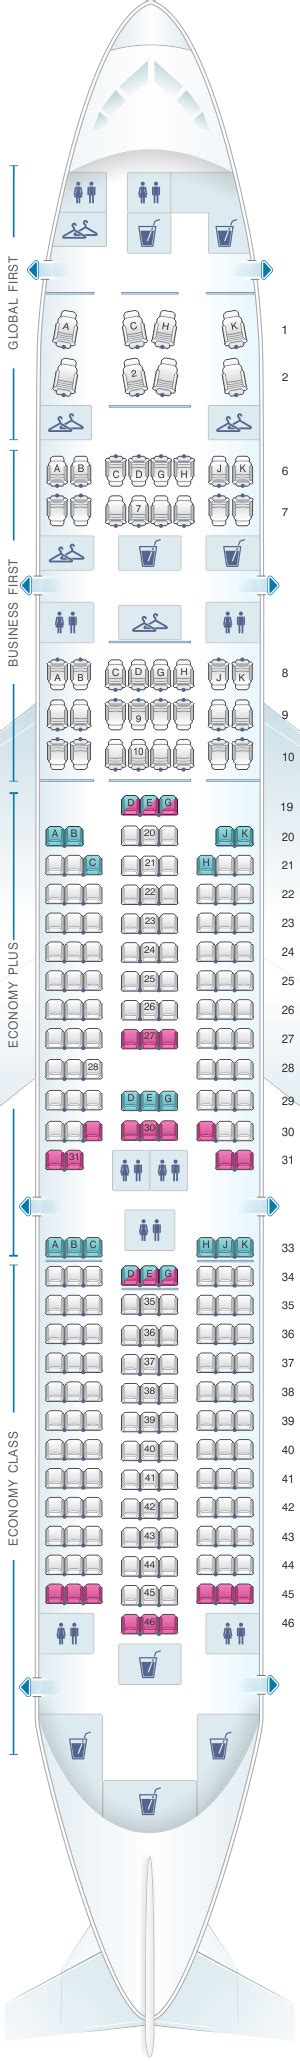 United airlines seating chart 777-200. Find the best seat wiht our United Boeing 777-200 (777) v5 seating chart. Use this seat map to get the most comfortable seats, legroom and recline before booking. Find the best seat wiht our United Boeing 777-200 (777) v5 seating chart. ... Airline Fleet. Airbus A319 v1 128 seats. Airbus A319 v2 126 seats. Airbus A320 150 seats. Boeing 737-700 ... 